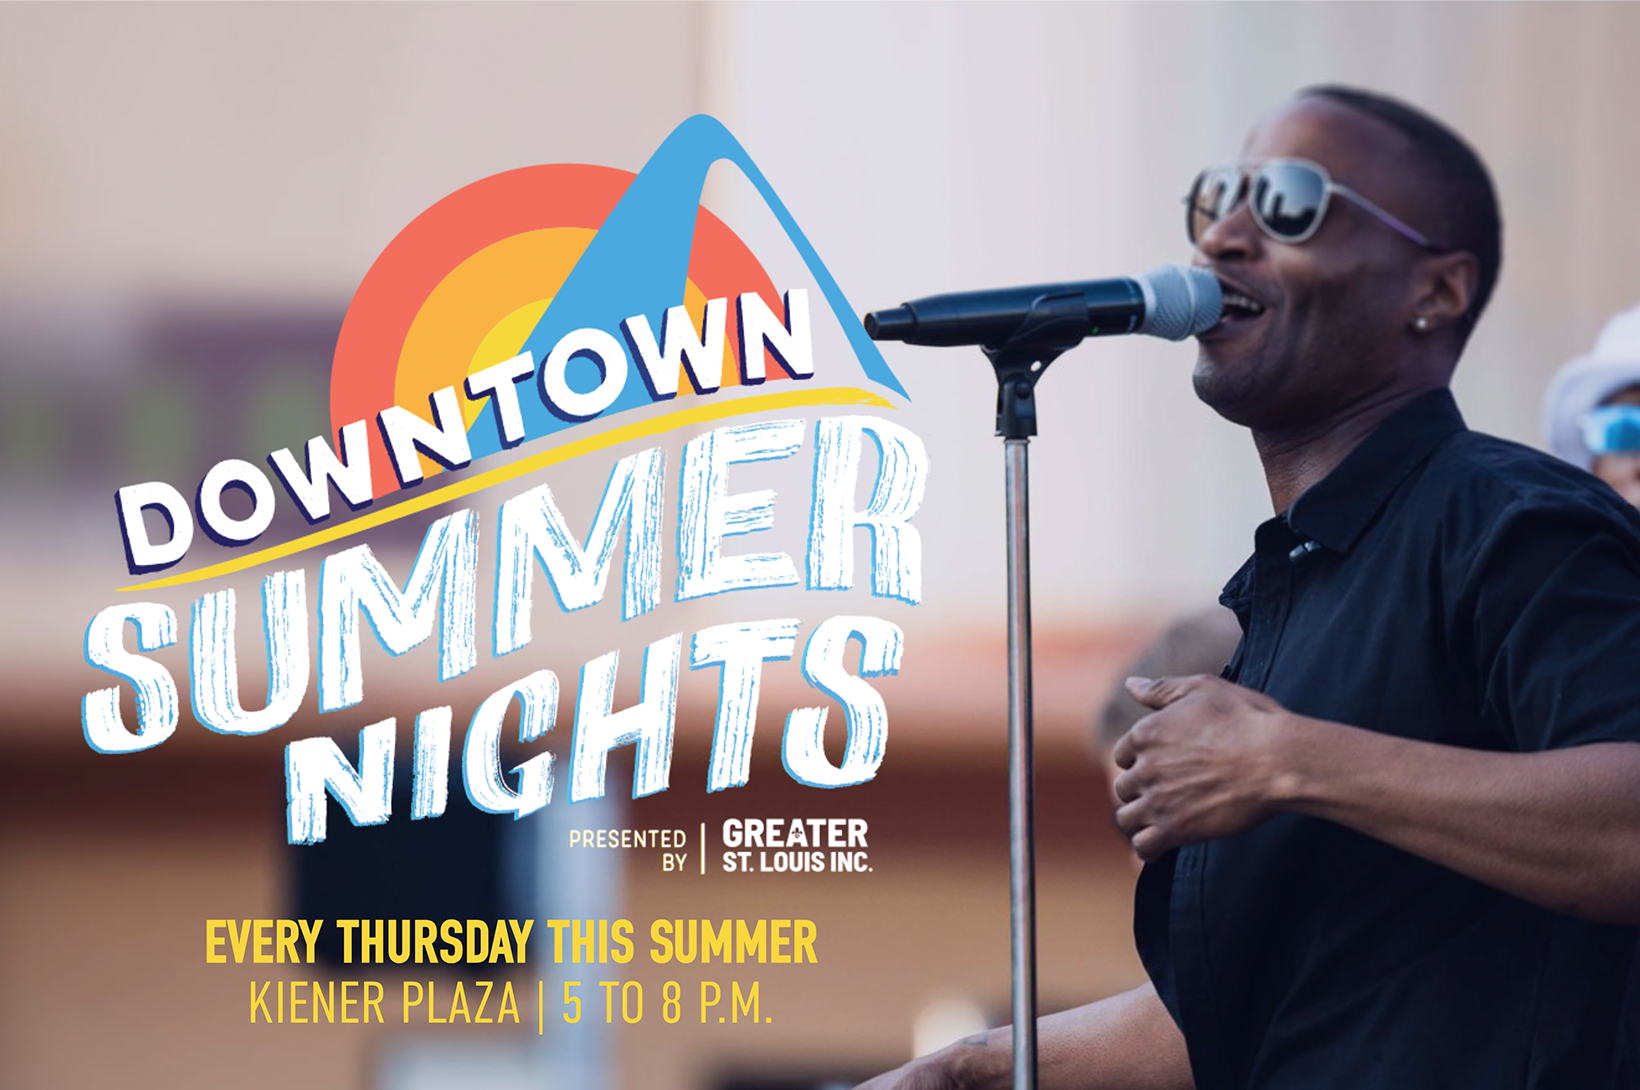 A graphic featuring a Black man singing into a microphone with the words "Downtown Summer Nights: Every Thursday this Summer, Kiener Plaza, 5 - 8 p.m.